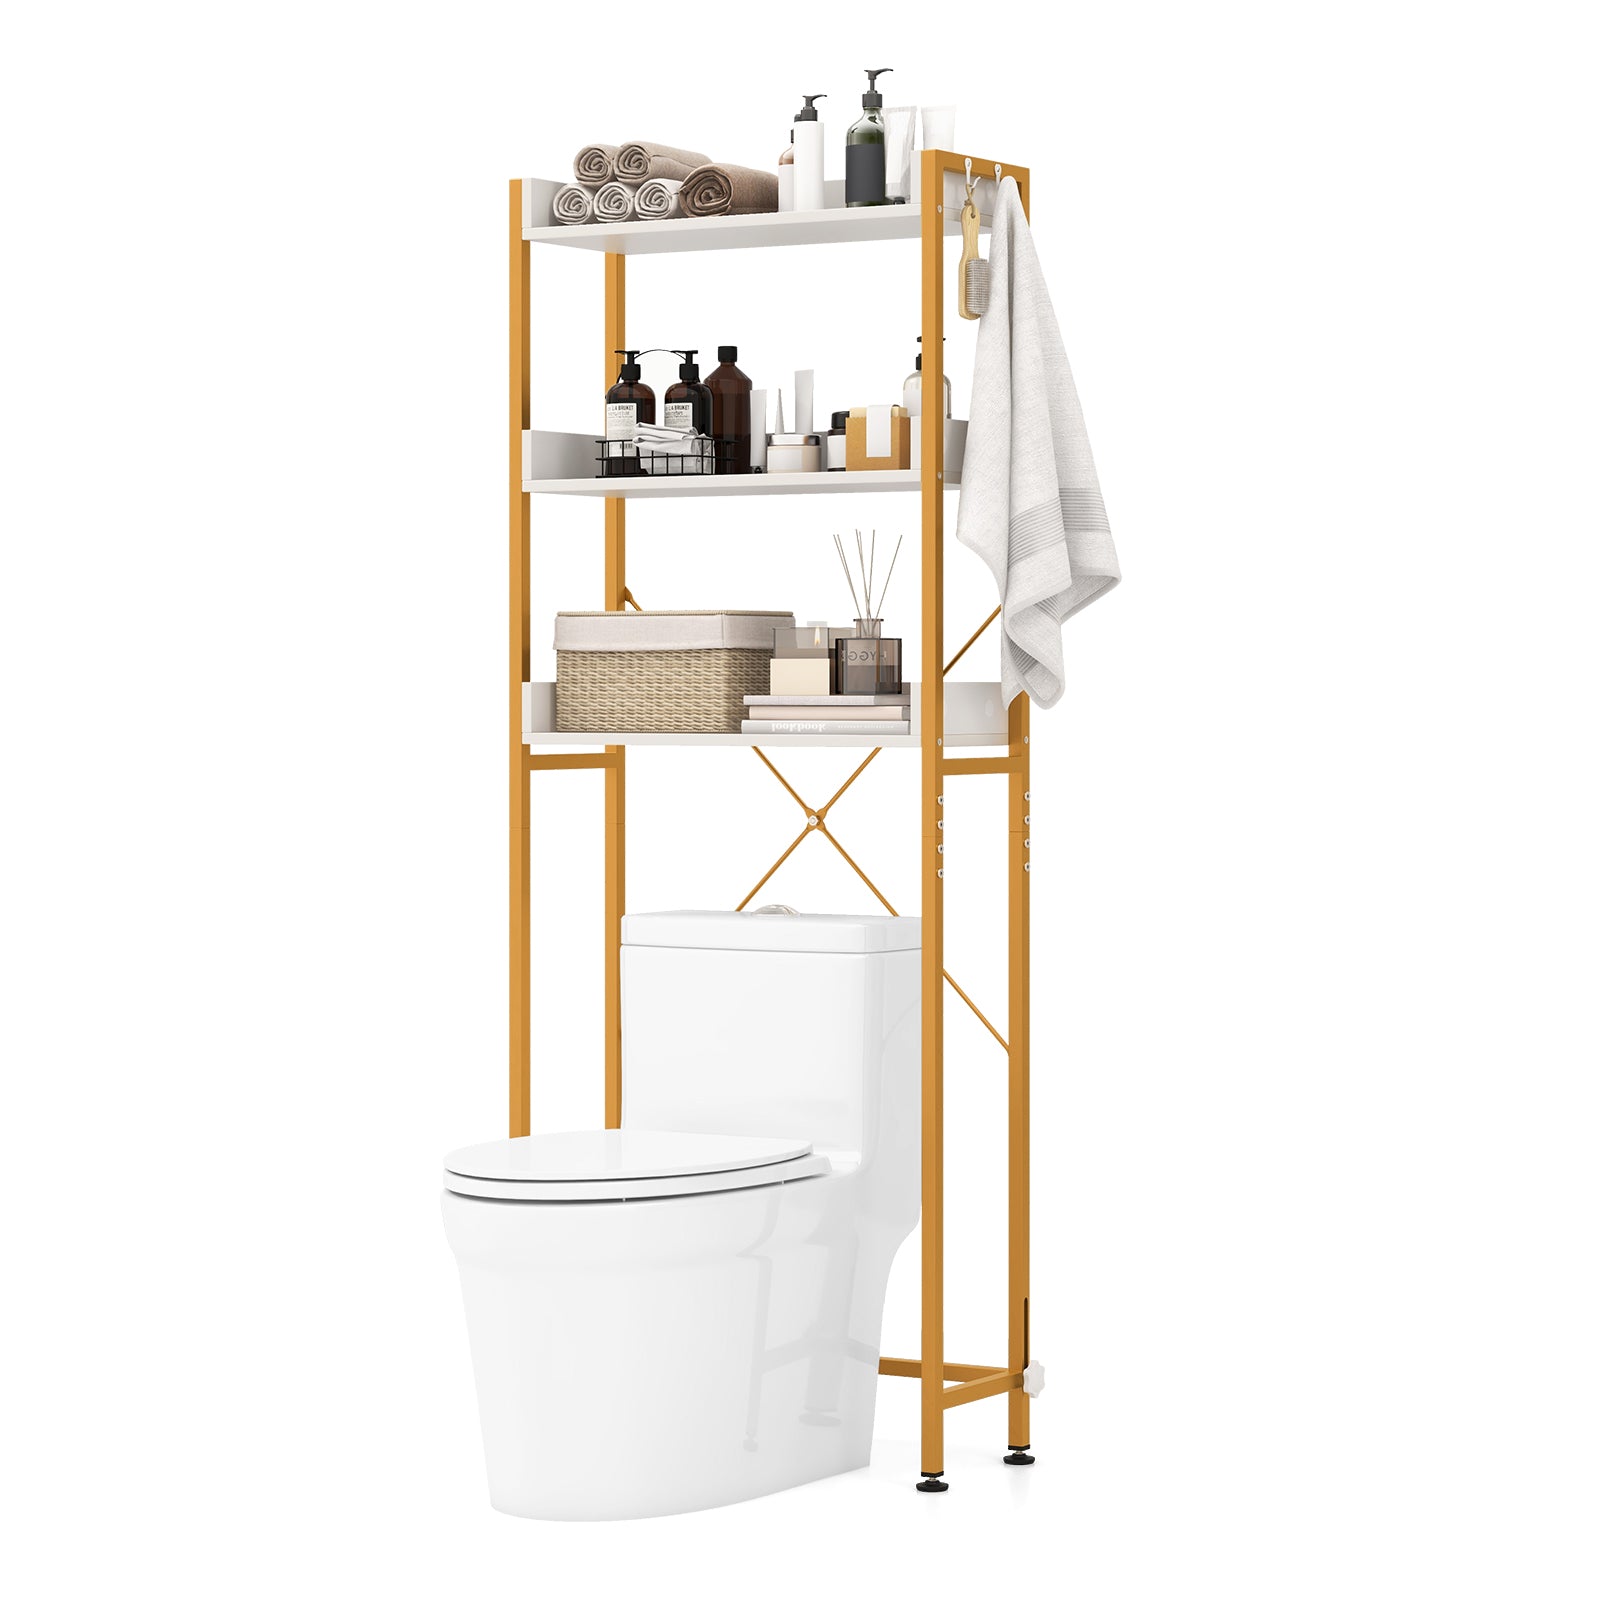 3-Tier Over The Toilet Storage Rack with 4 Hooks and Adjustable Bottom Bar-White